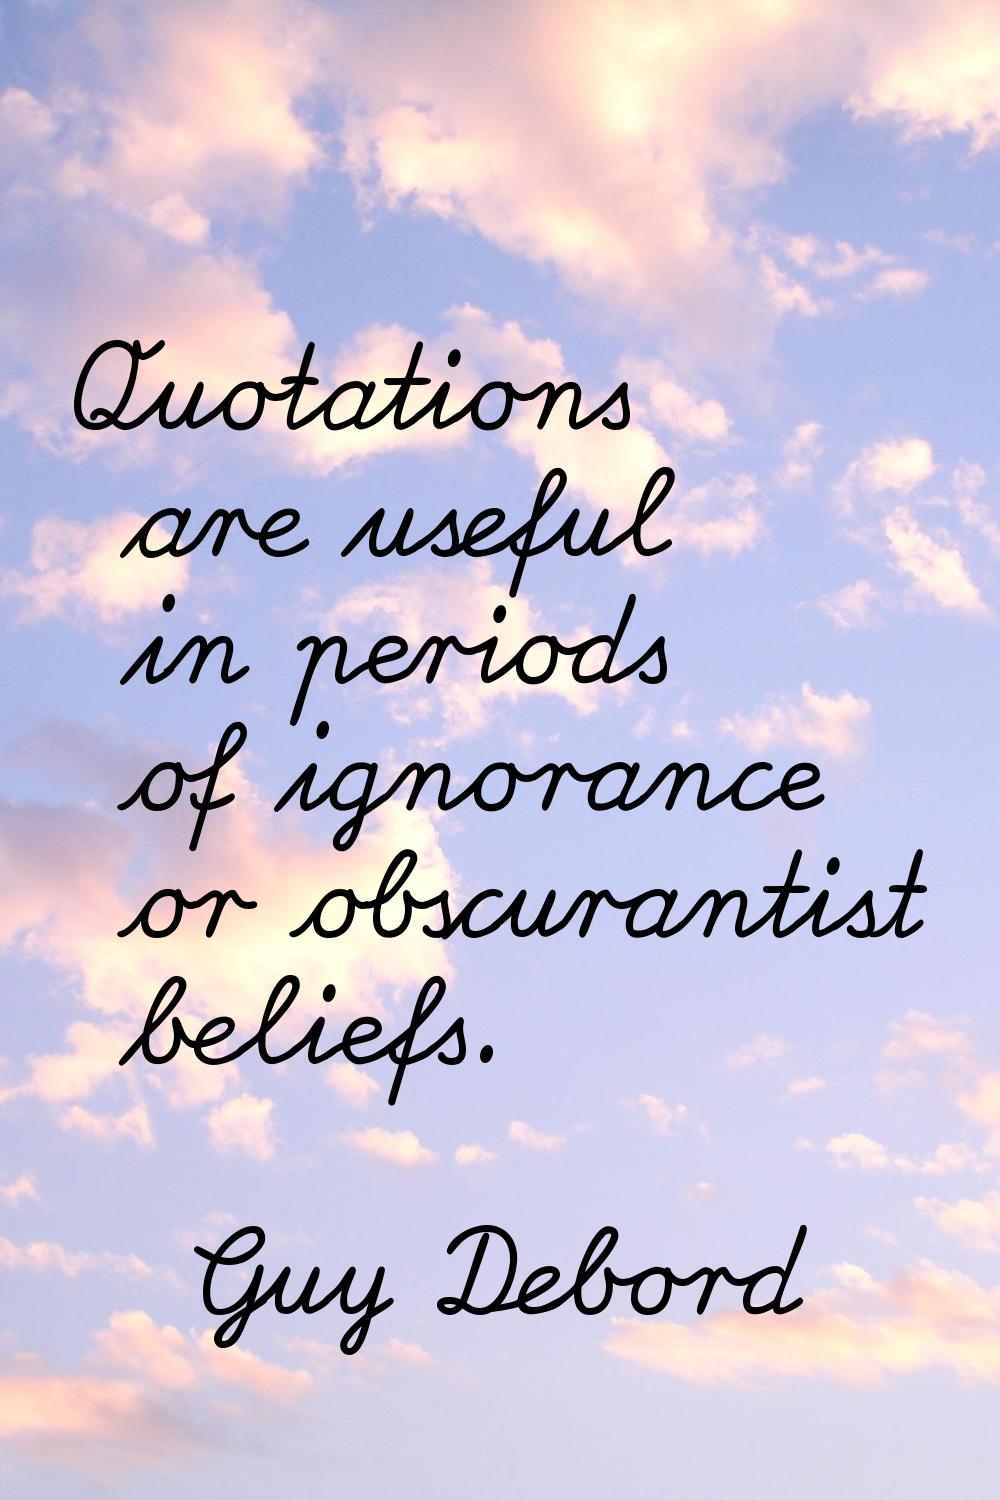 Quotations are useful in periods of ignorance or obscurantist beliefs.